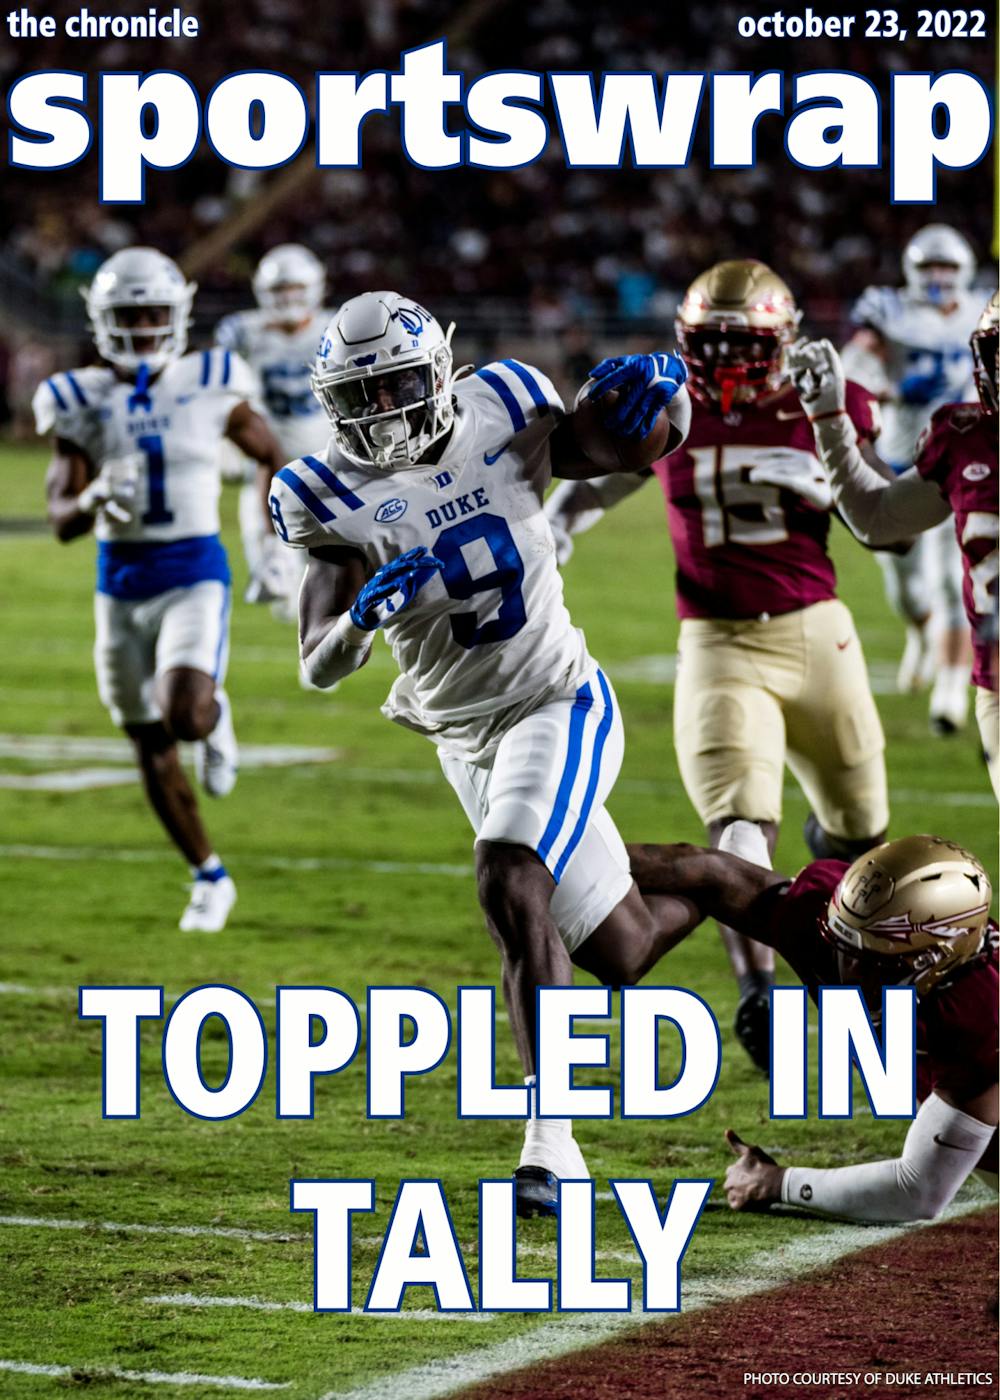 Jaquez Moore jets into the end zone during Duke's loss to Florida State.